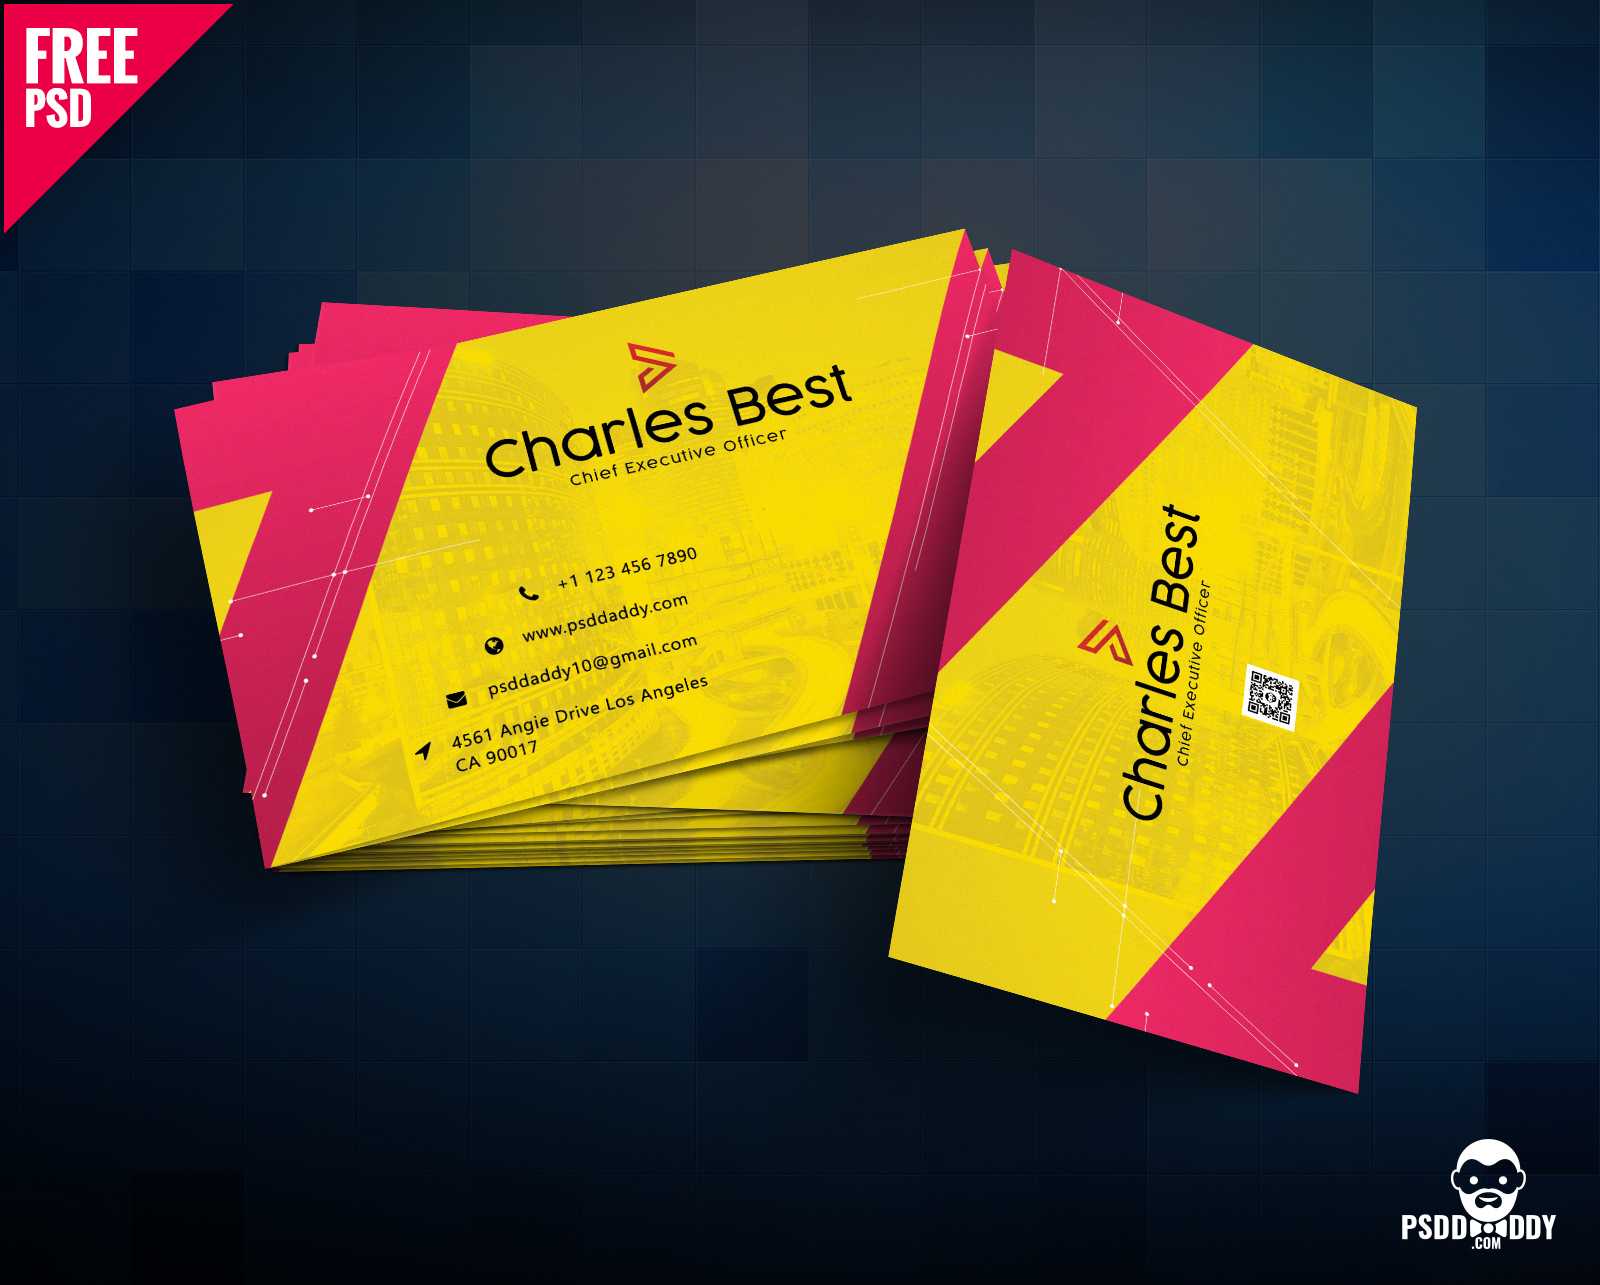 Download] Creative Business Card Free Psd | Psddaddy Pertaining To Business Card Maker Template